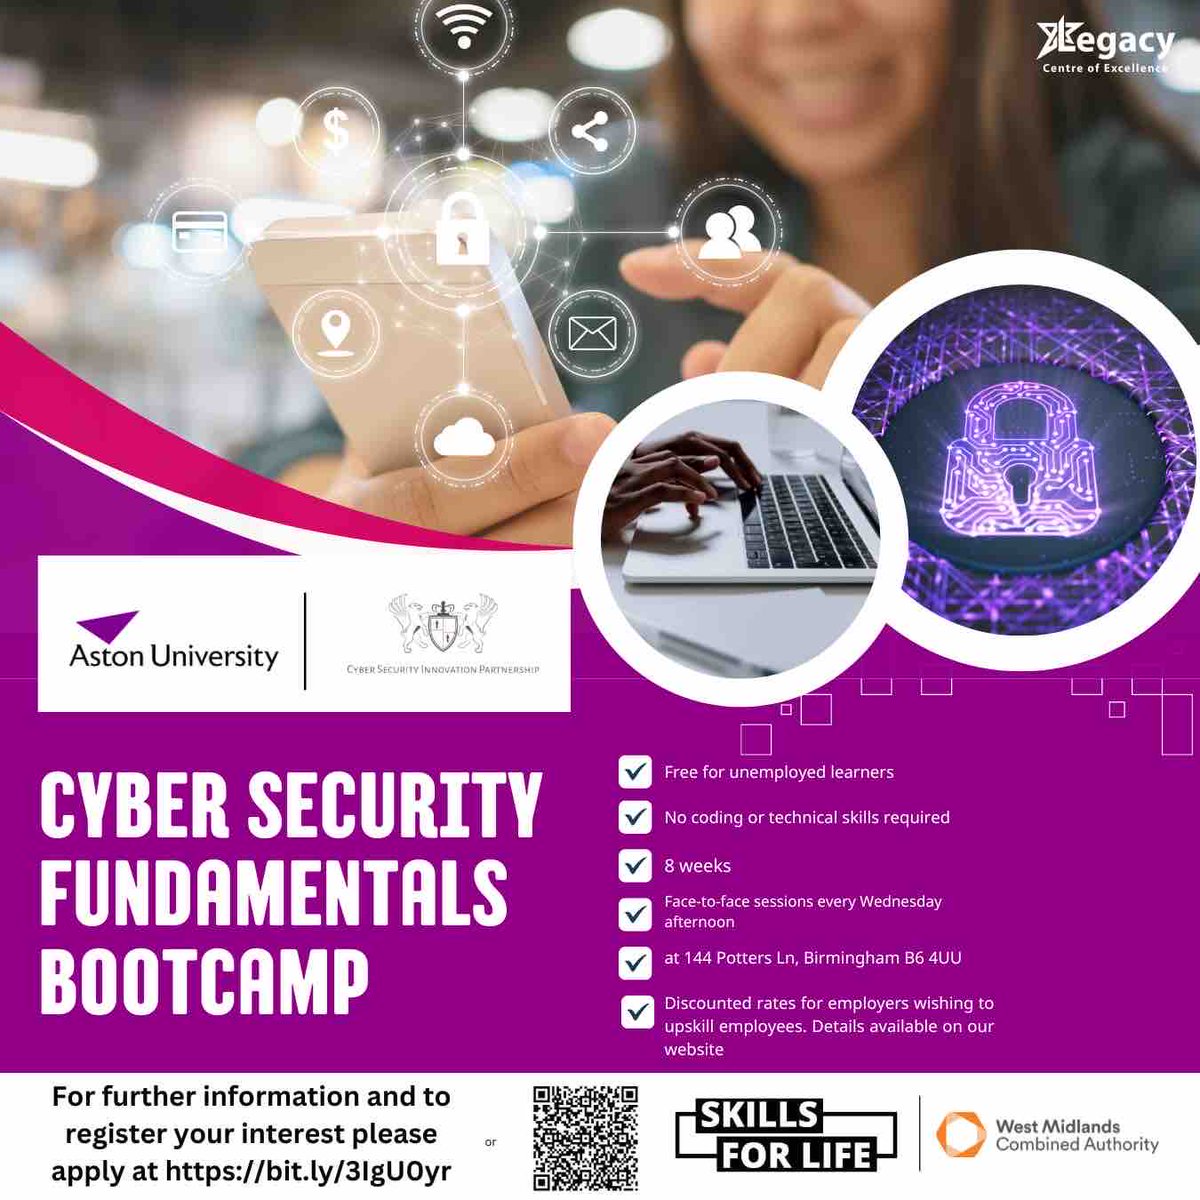 Delivered by APMG certified experts from Aston Cyber Security Innovation Centre, this programme is designed to welcome beginners with open arms!🛡️ Don’t miss this chance to gain invaluable insights and skills in cyber security. Apply now 🔐✨ 🔗: ow.ly/7Brc50R1ro4